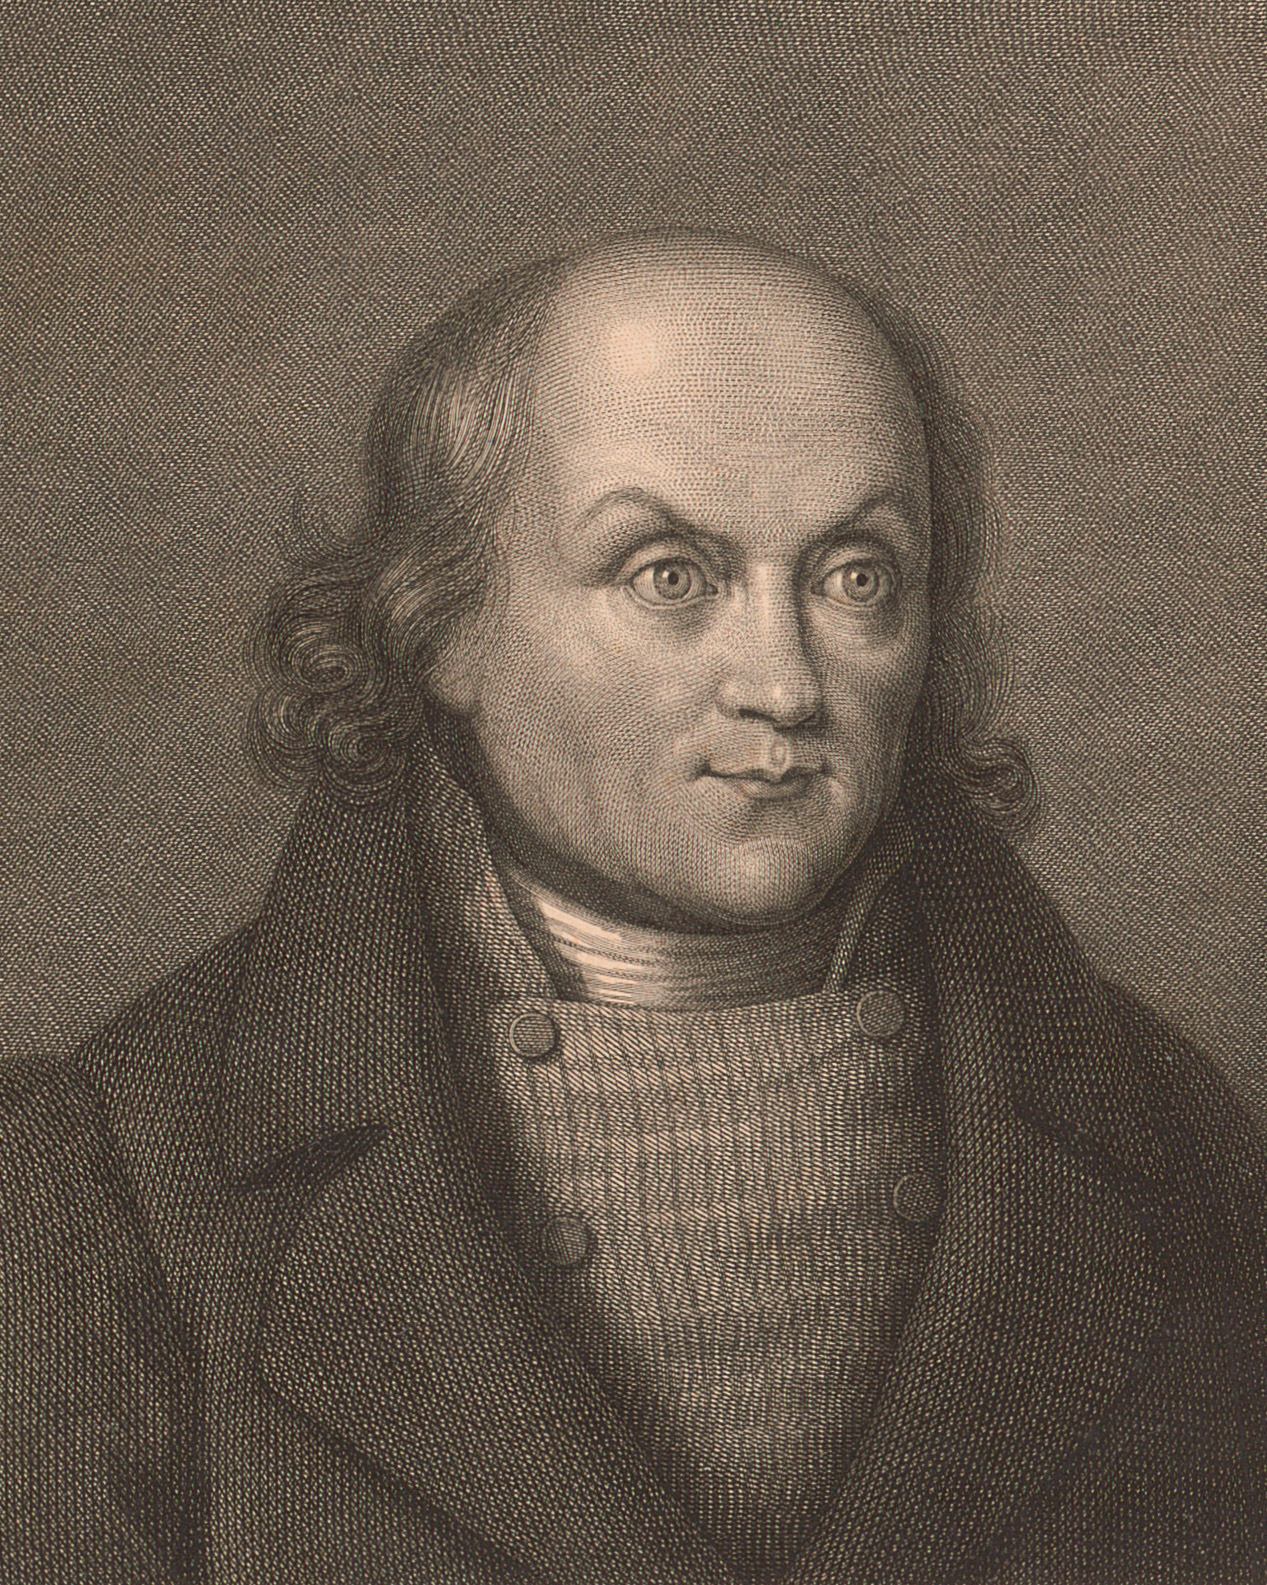 Hans Georg Nägeli, the ‘father of song’ from Zurich (1773-1836)